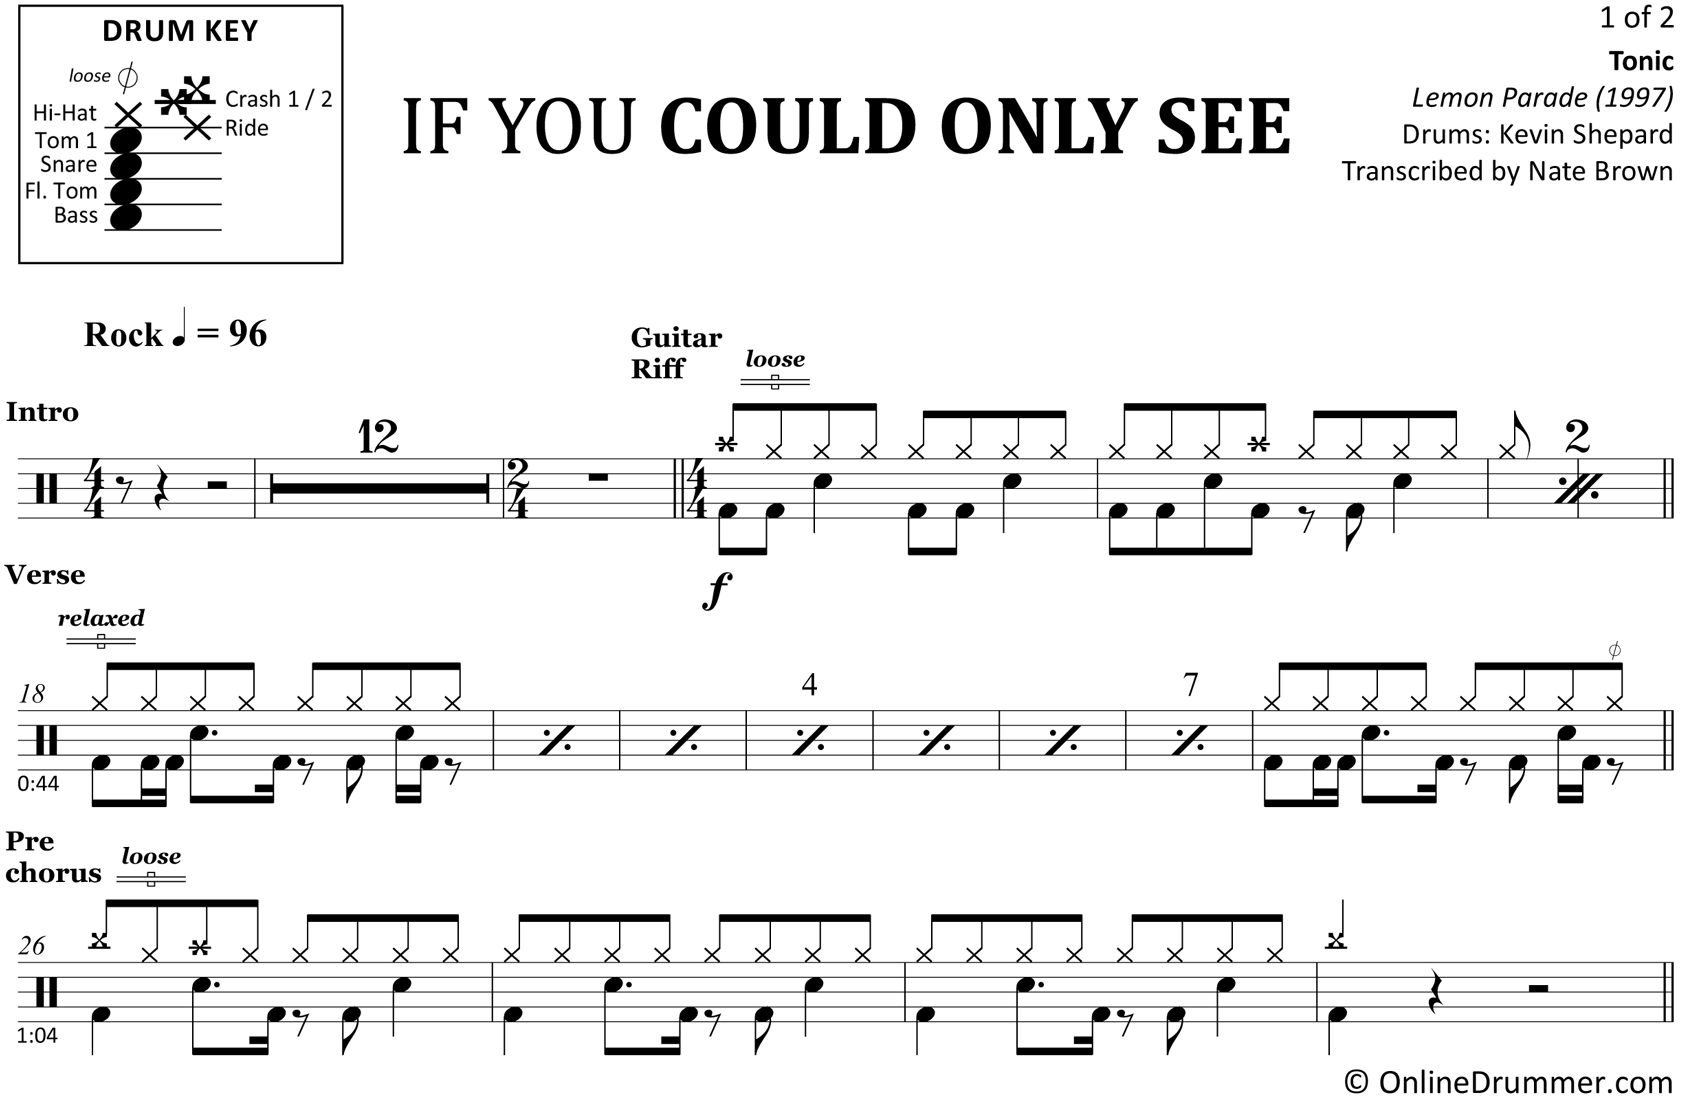 If You Could Only See - Tonic - Drum Sheet Music